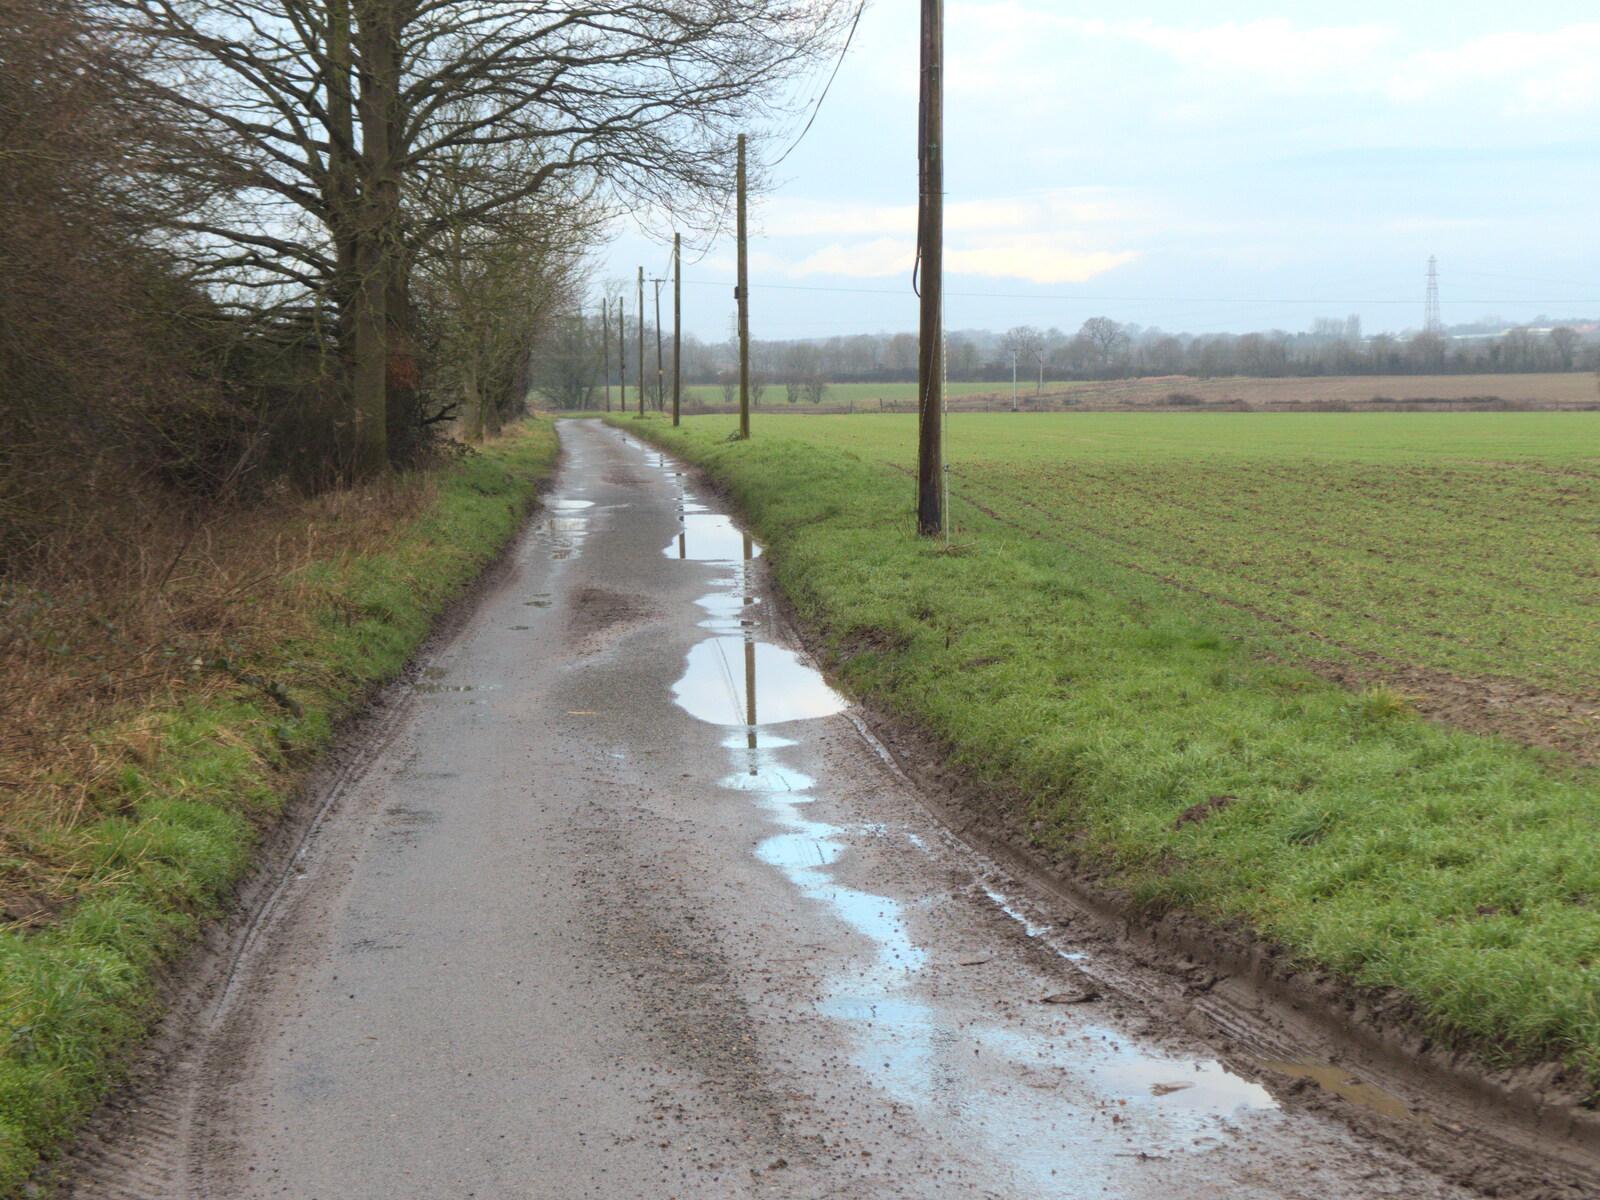 The road between Thrandeston and Mellis from Derelict Infants School and Ice Sculptures, Diss and Palgrave, Norfolk and Suffolk - 13th February 2021